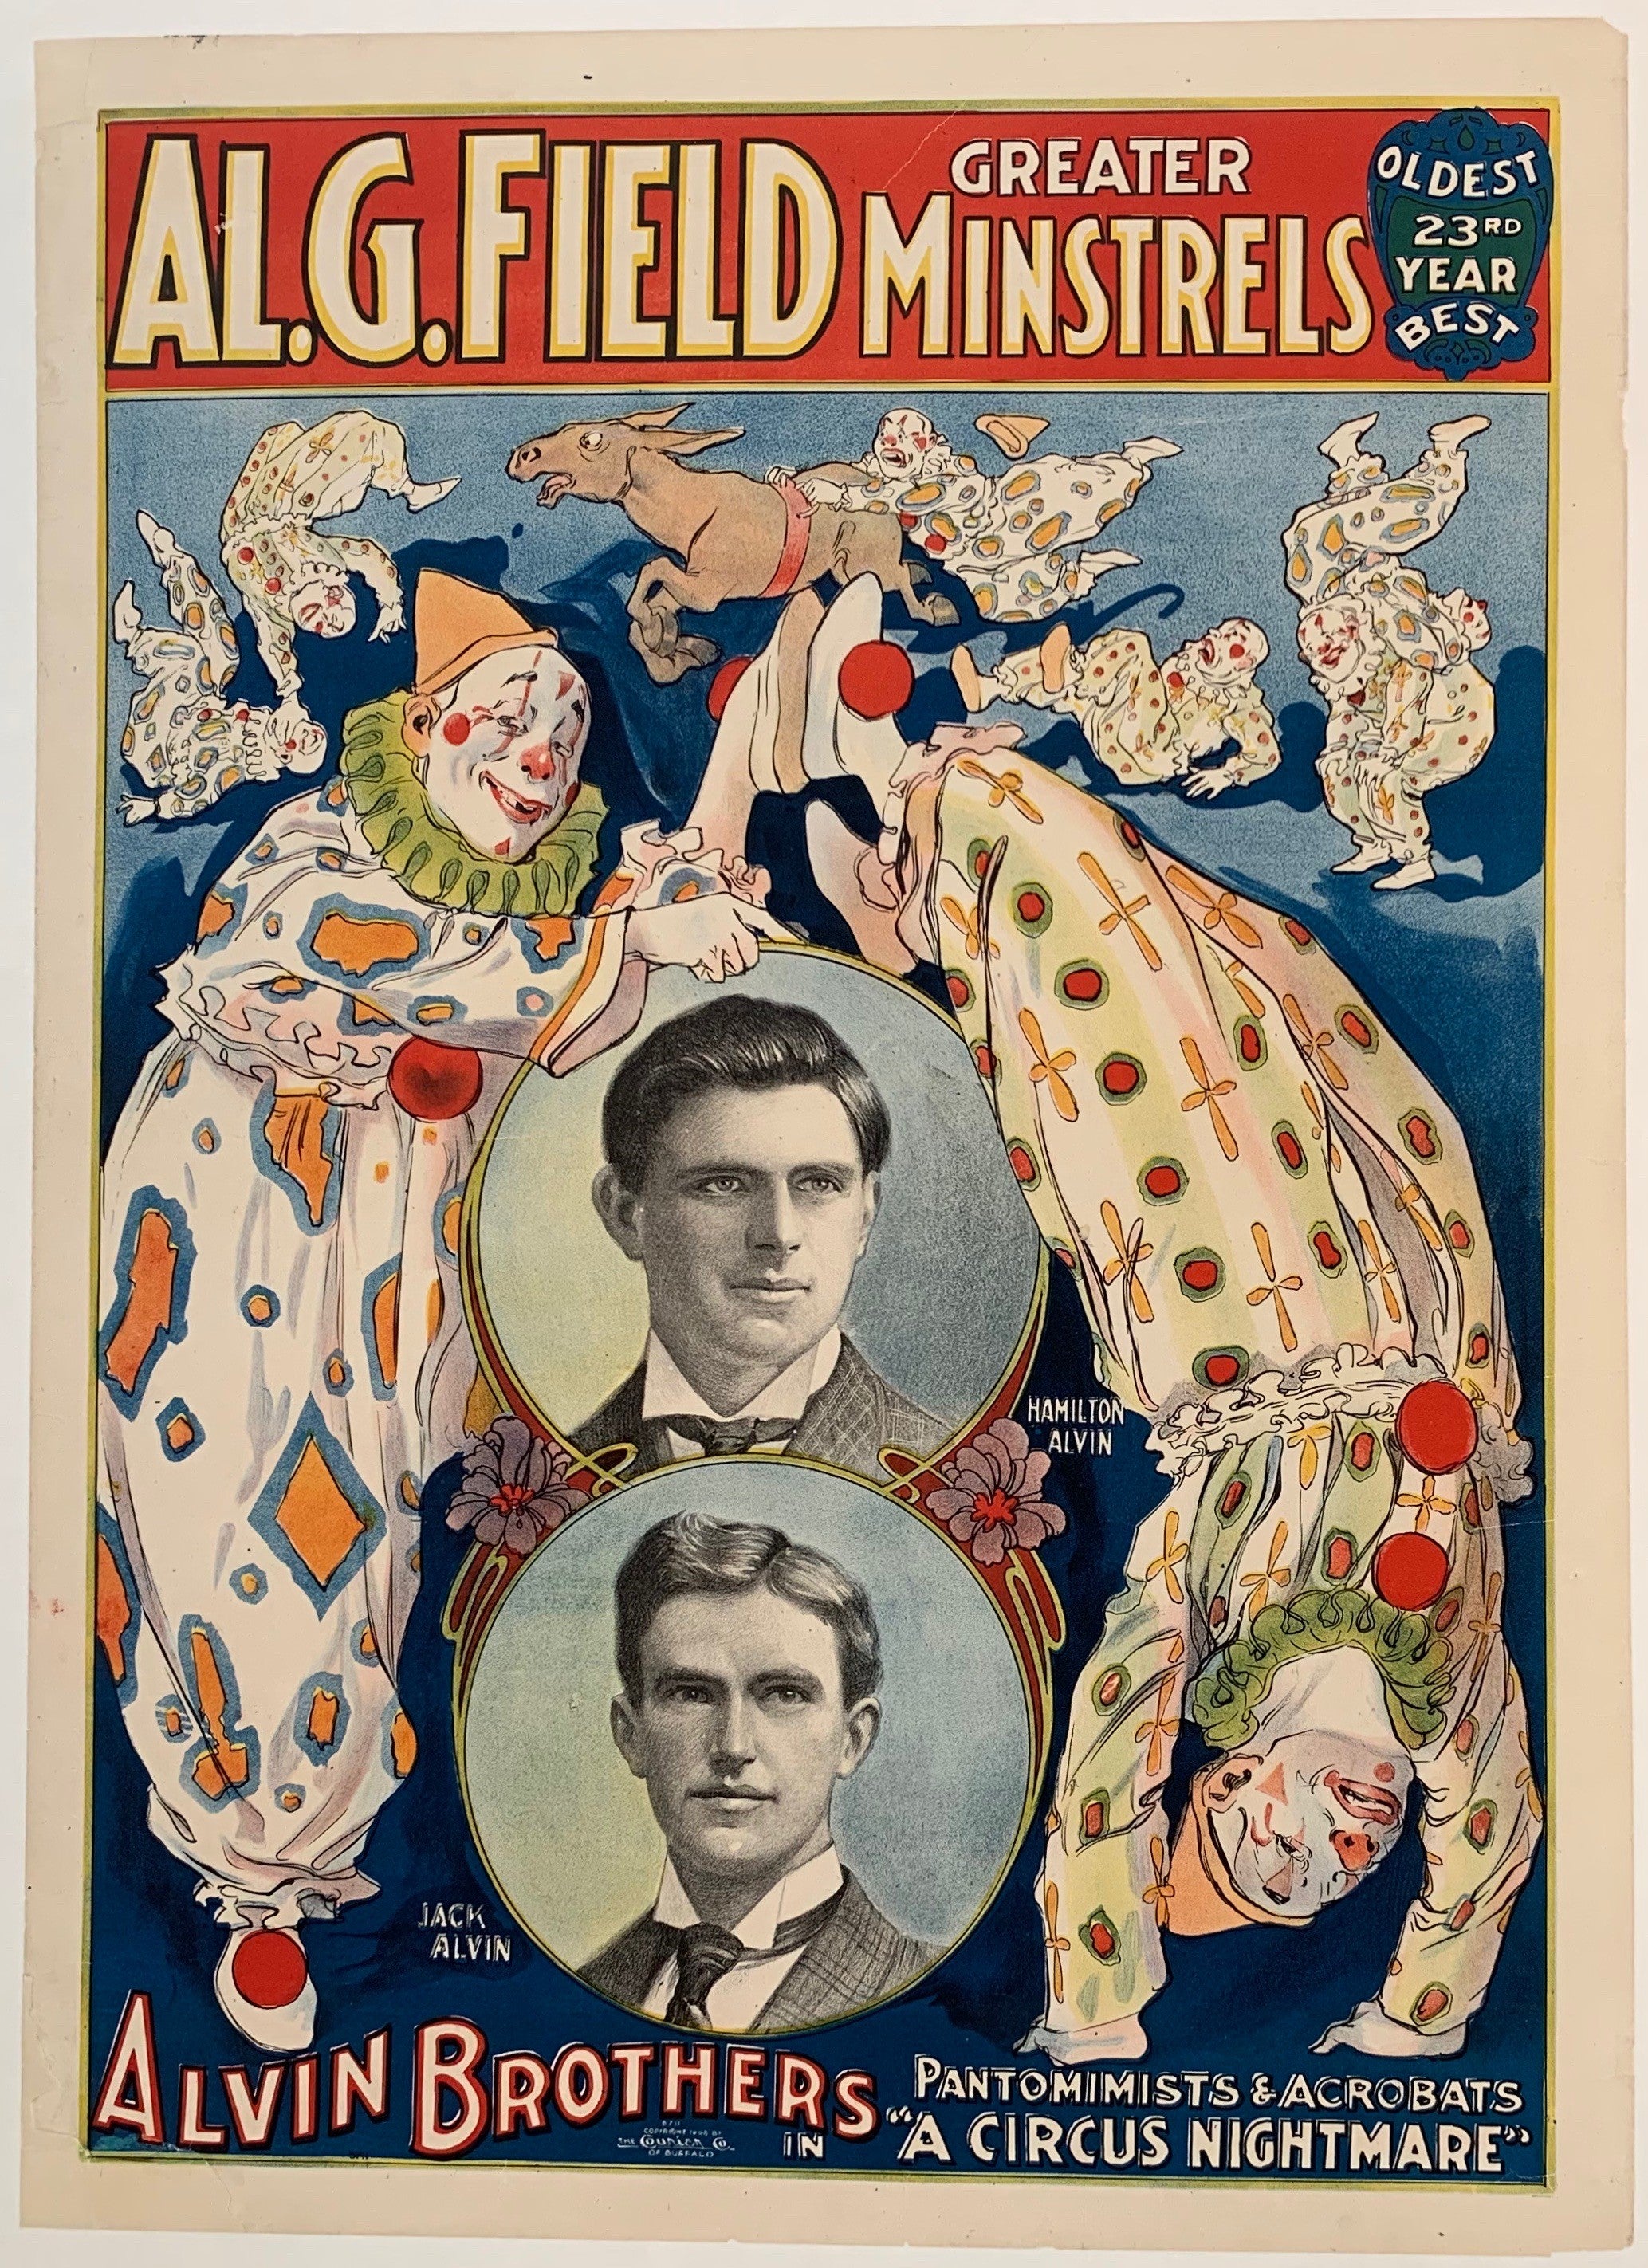 Alvin Brothers in "A Circus Nightmare"